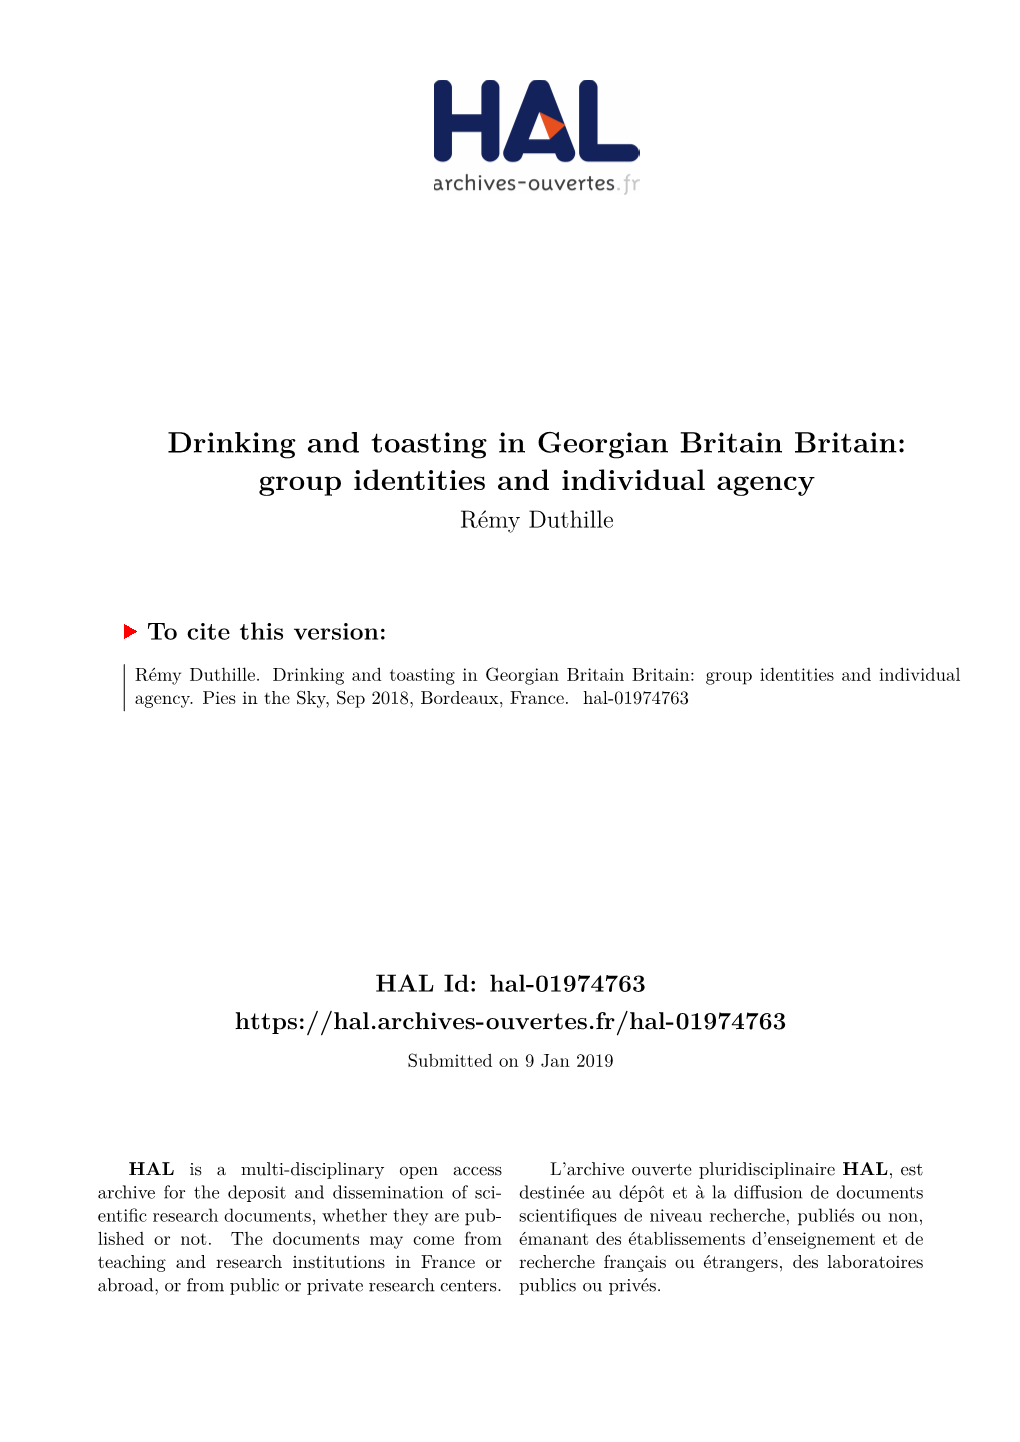 Drinking and Toasting in Georgian Britain Britain: Group Identities and Individual Agency Rémy Duthille